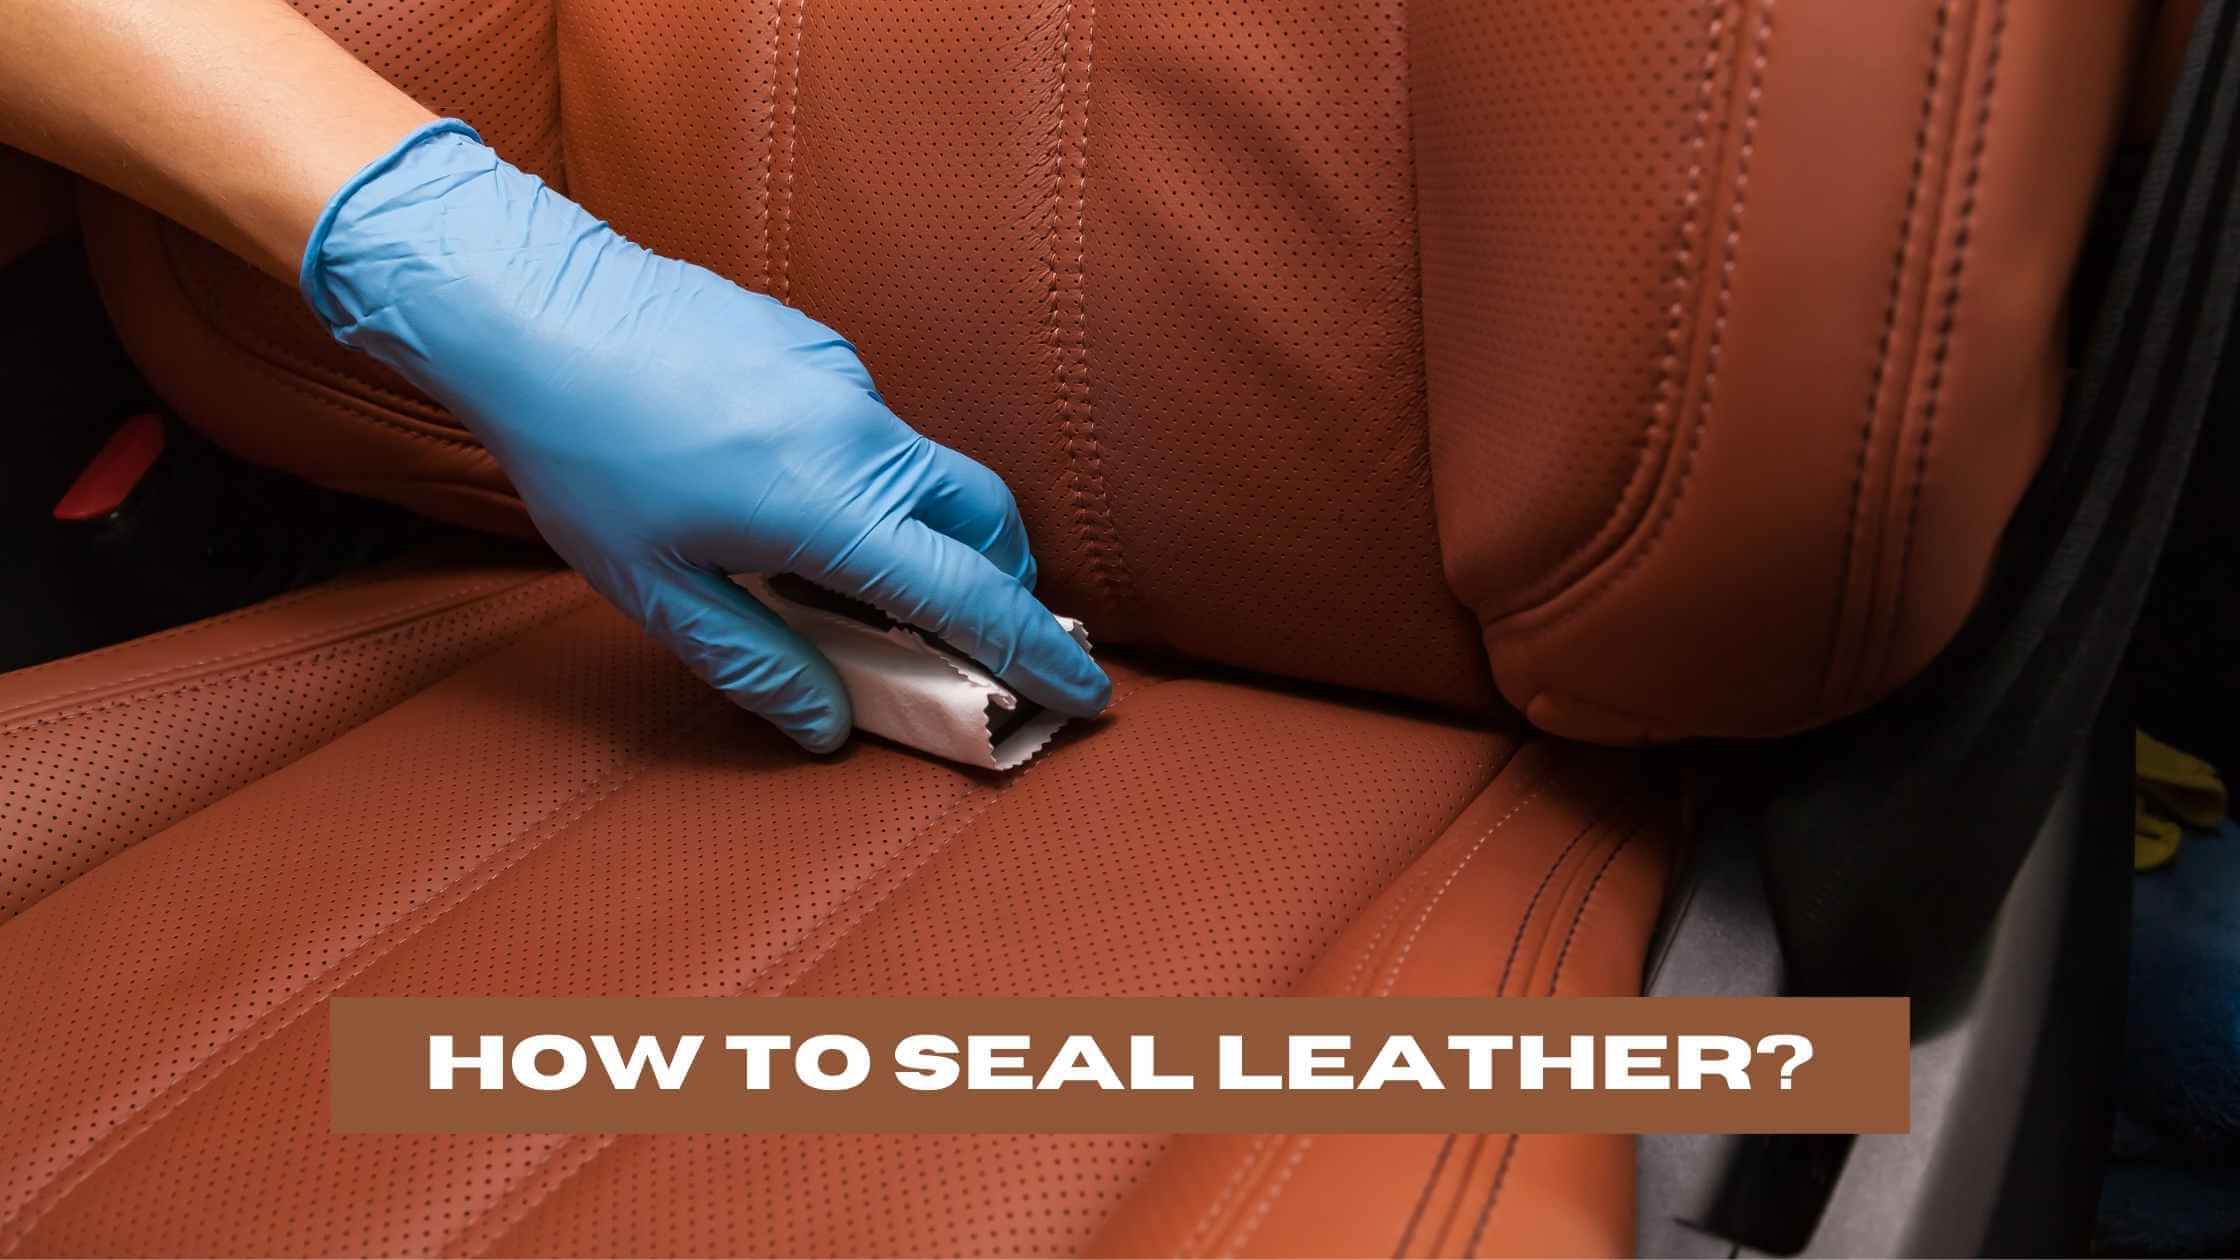 How to Seal Leather